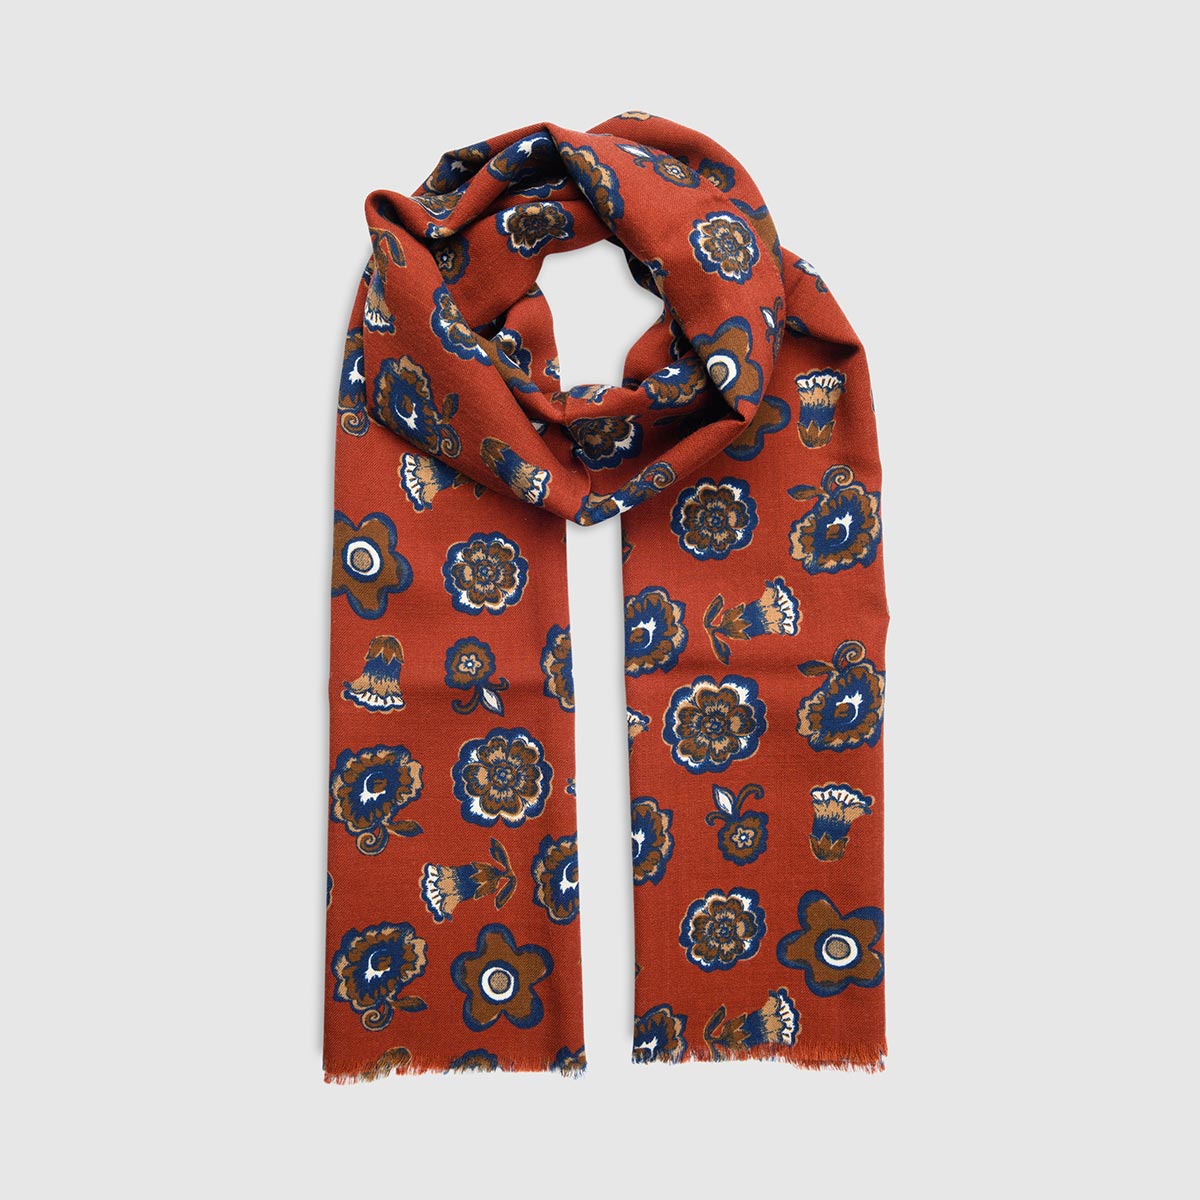 Wool Scarf with Floral Patterns